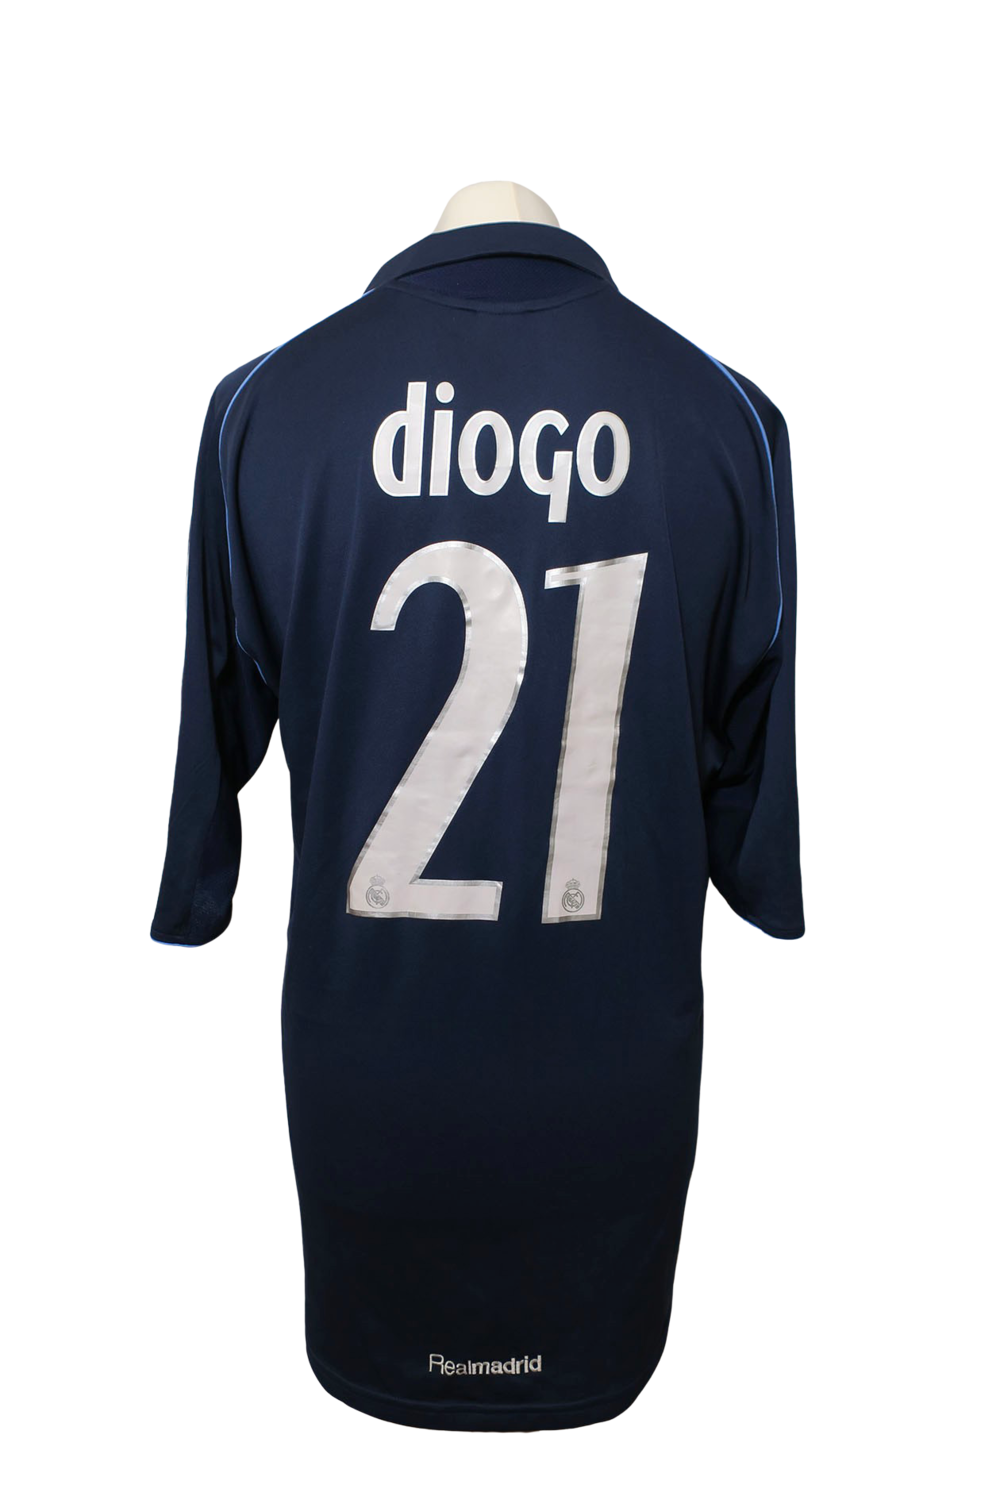 Maillot Real Madrid Away 2005/06 #21 Diogo - XL